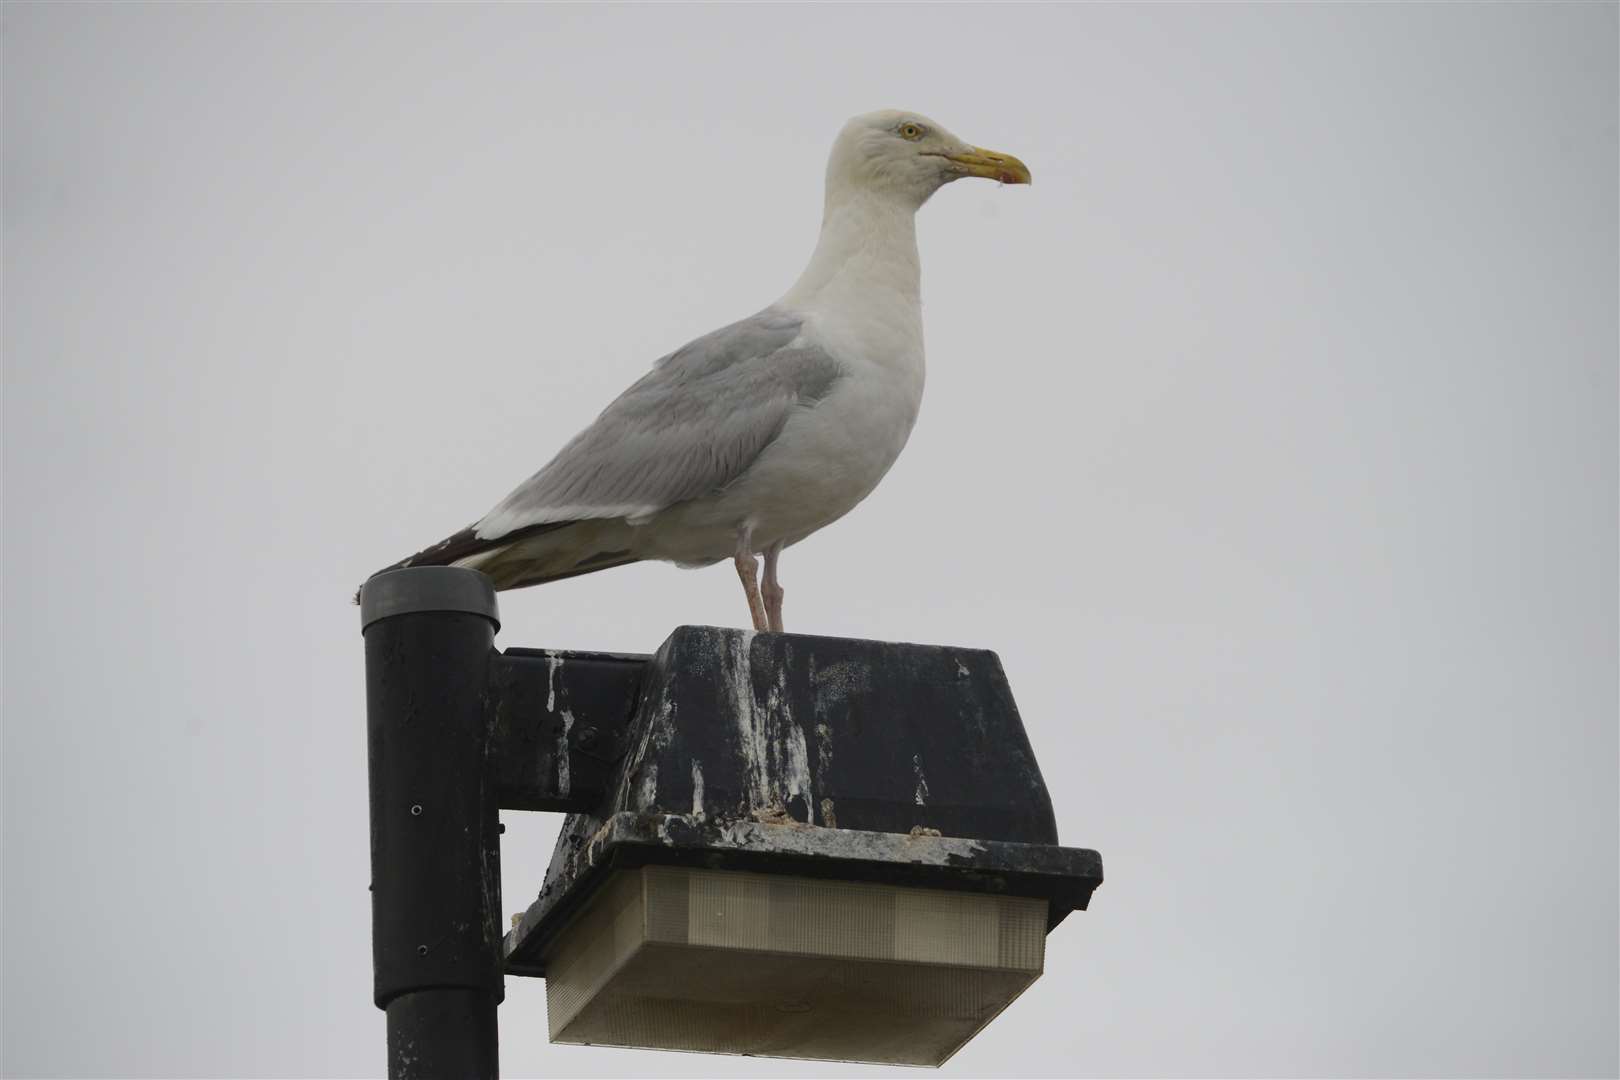 One of the gull's parents stands guard on a light on the top of the car park